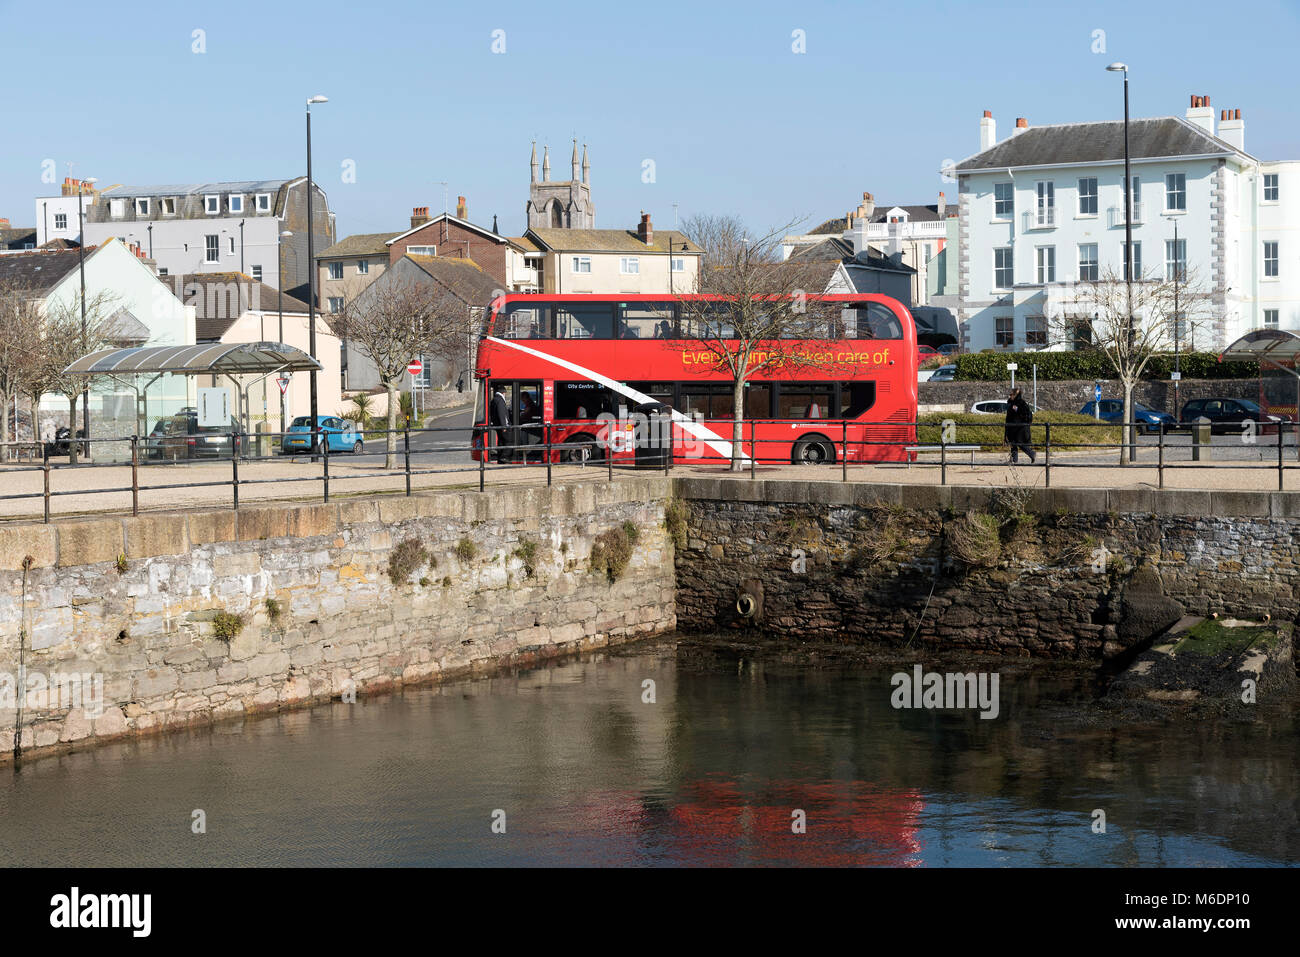 Plymouth, Devon, England UK. February 2018. A red double decker bus on the waterfront at Royal William Yard Harbour Stock Photo